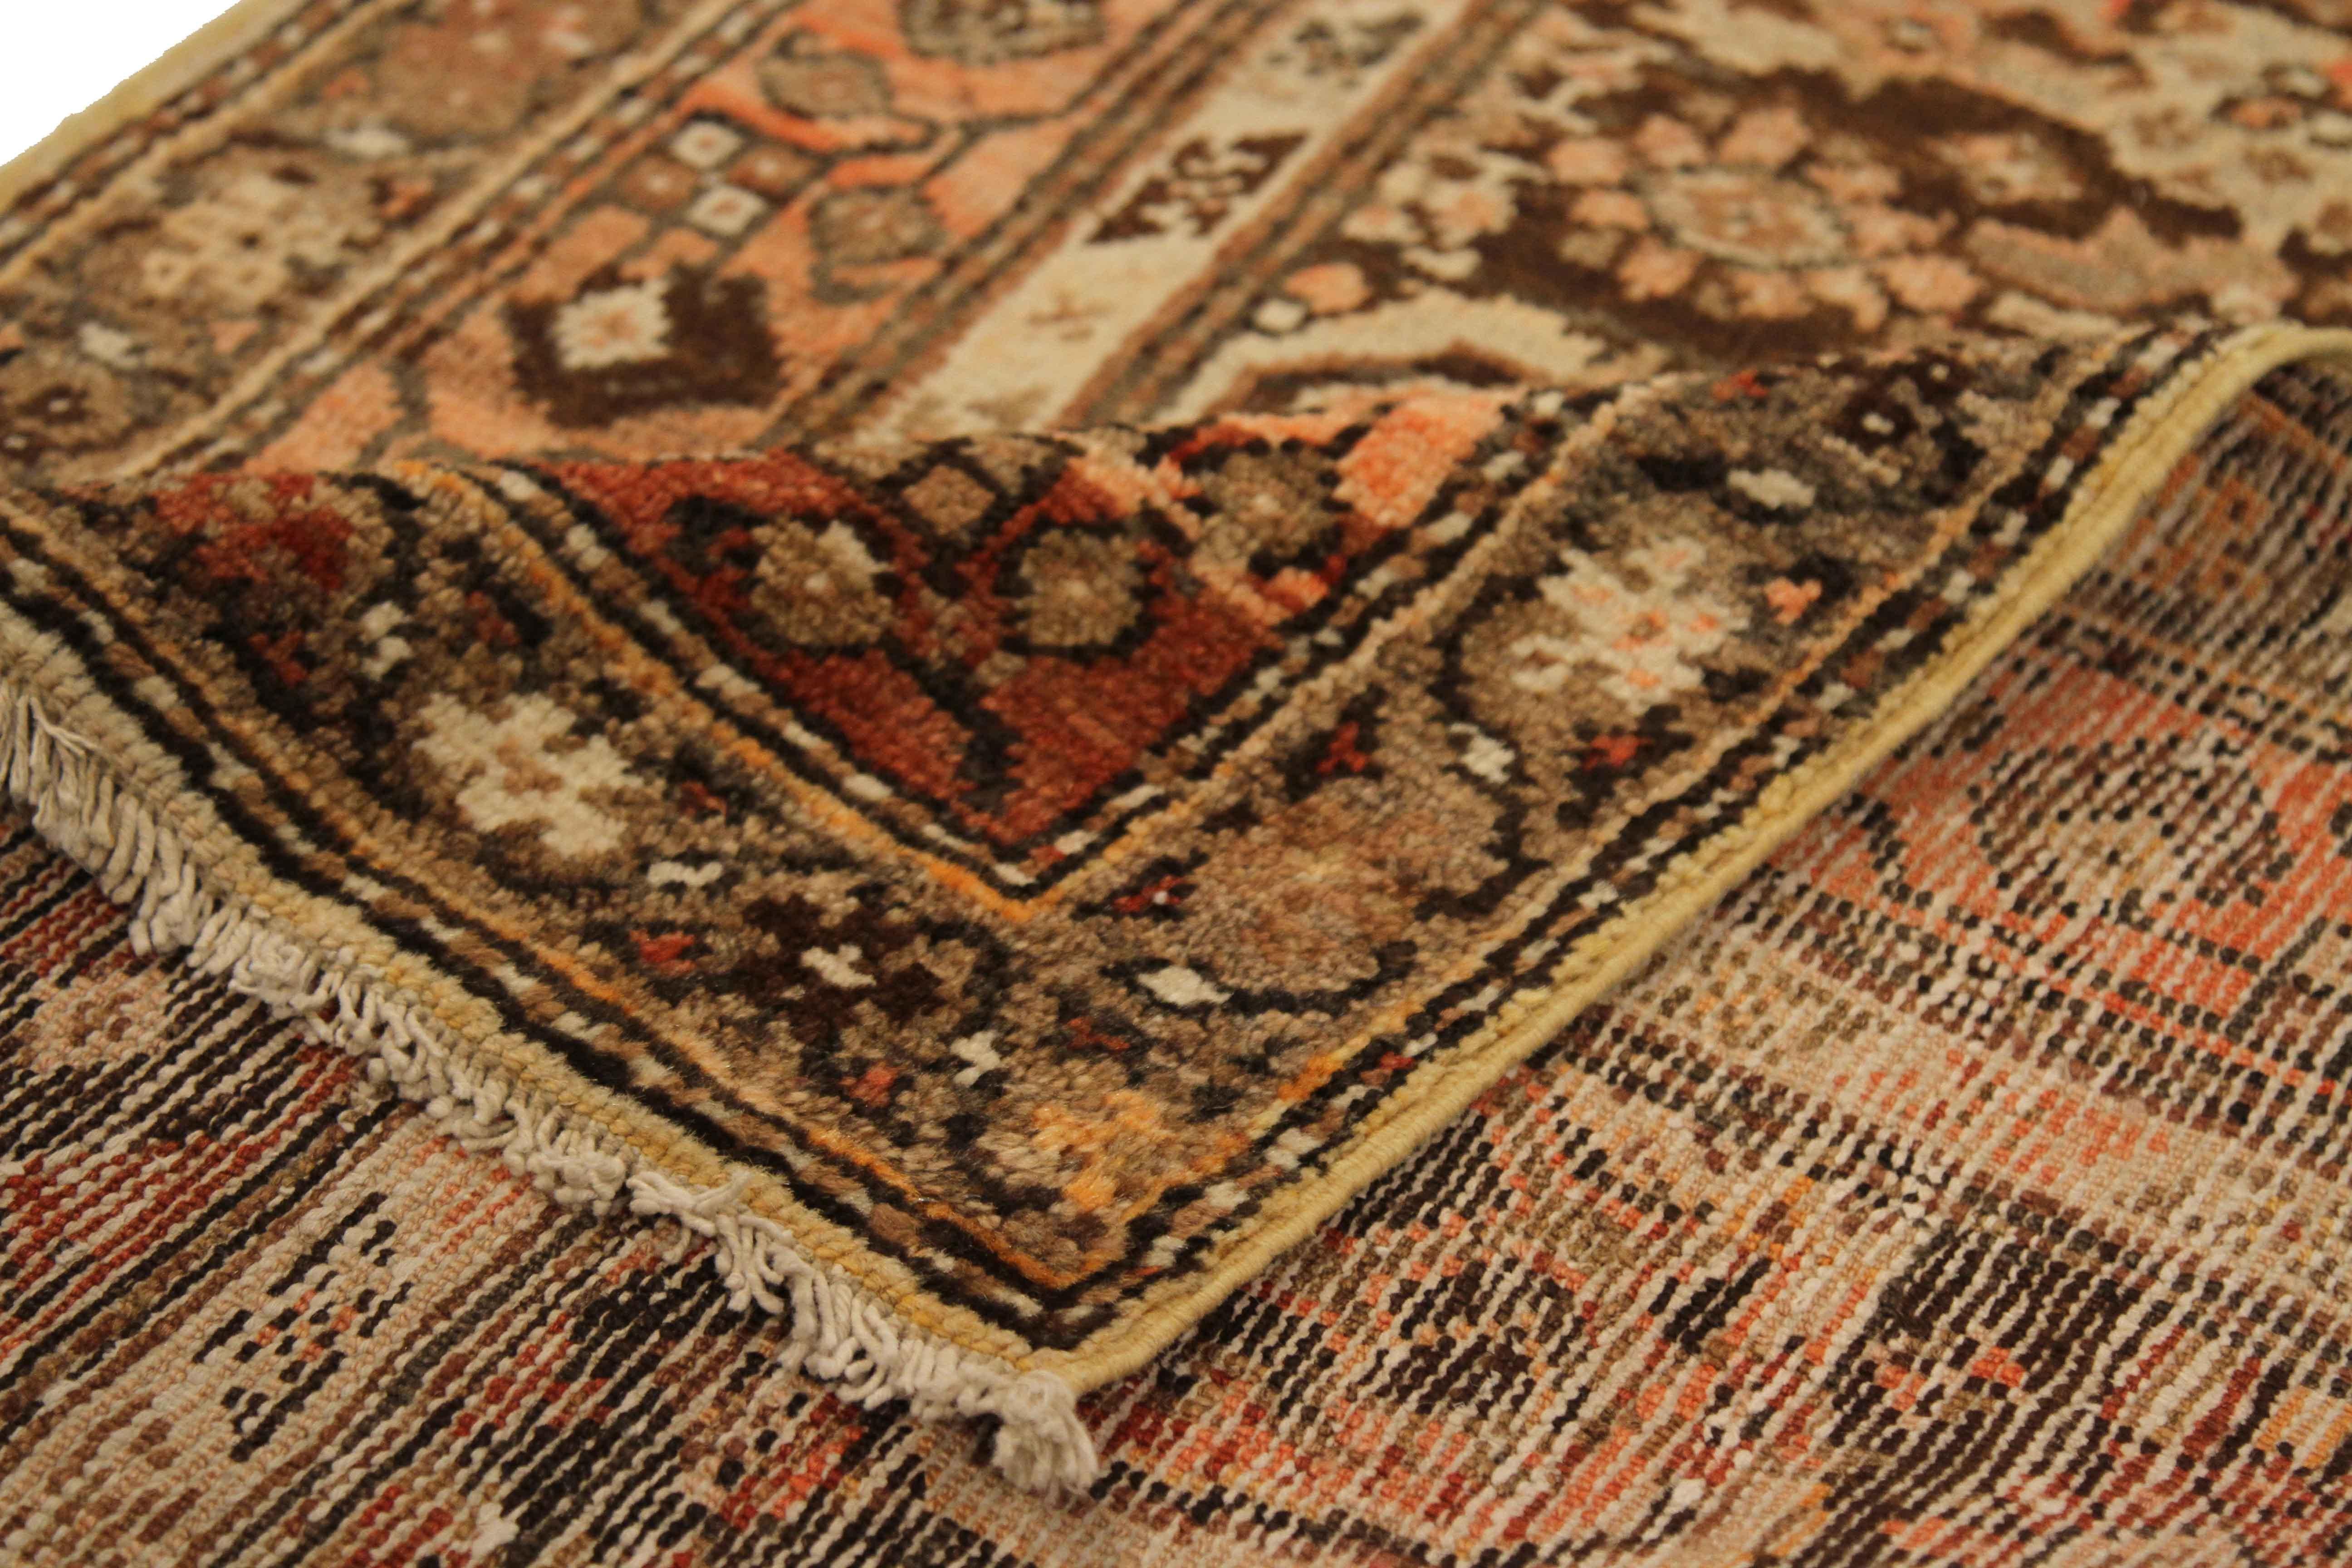 Made by handweaving high-grade wool, this antique Persian rug has its entire field covered with ornate design patterns featuring medallions and floral figures. It has a rich mix of brown, red, beige and ivory that will highlight wooden floors in